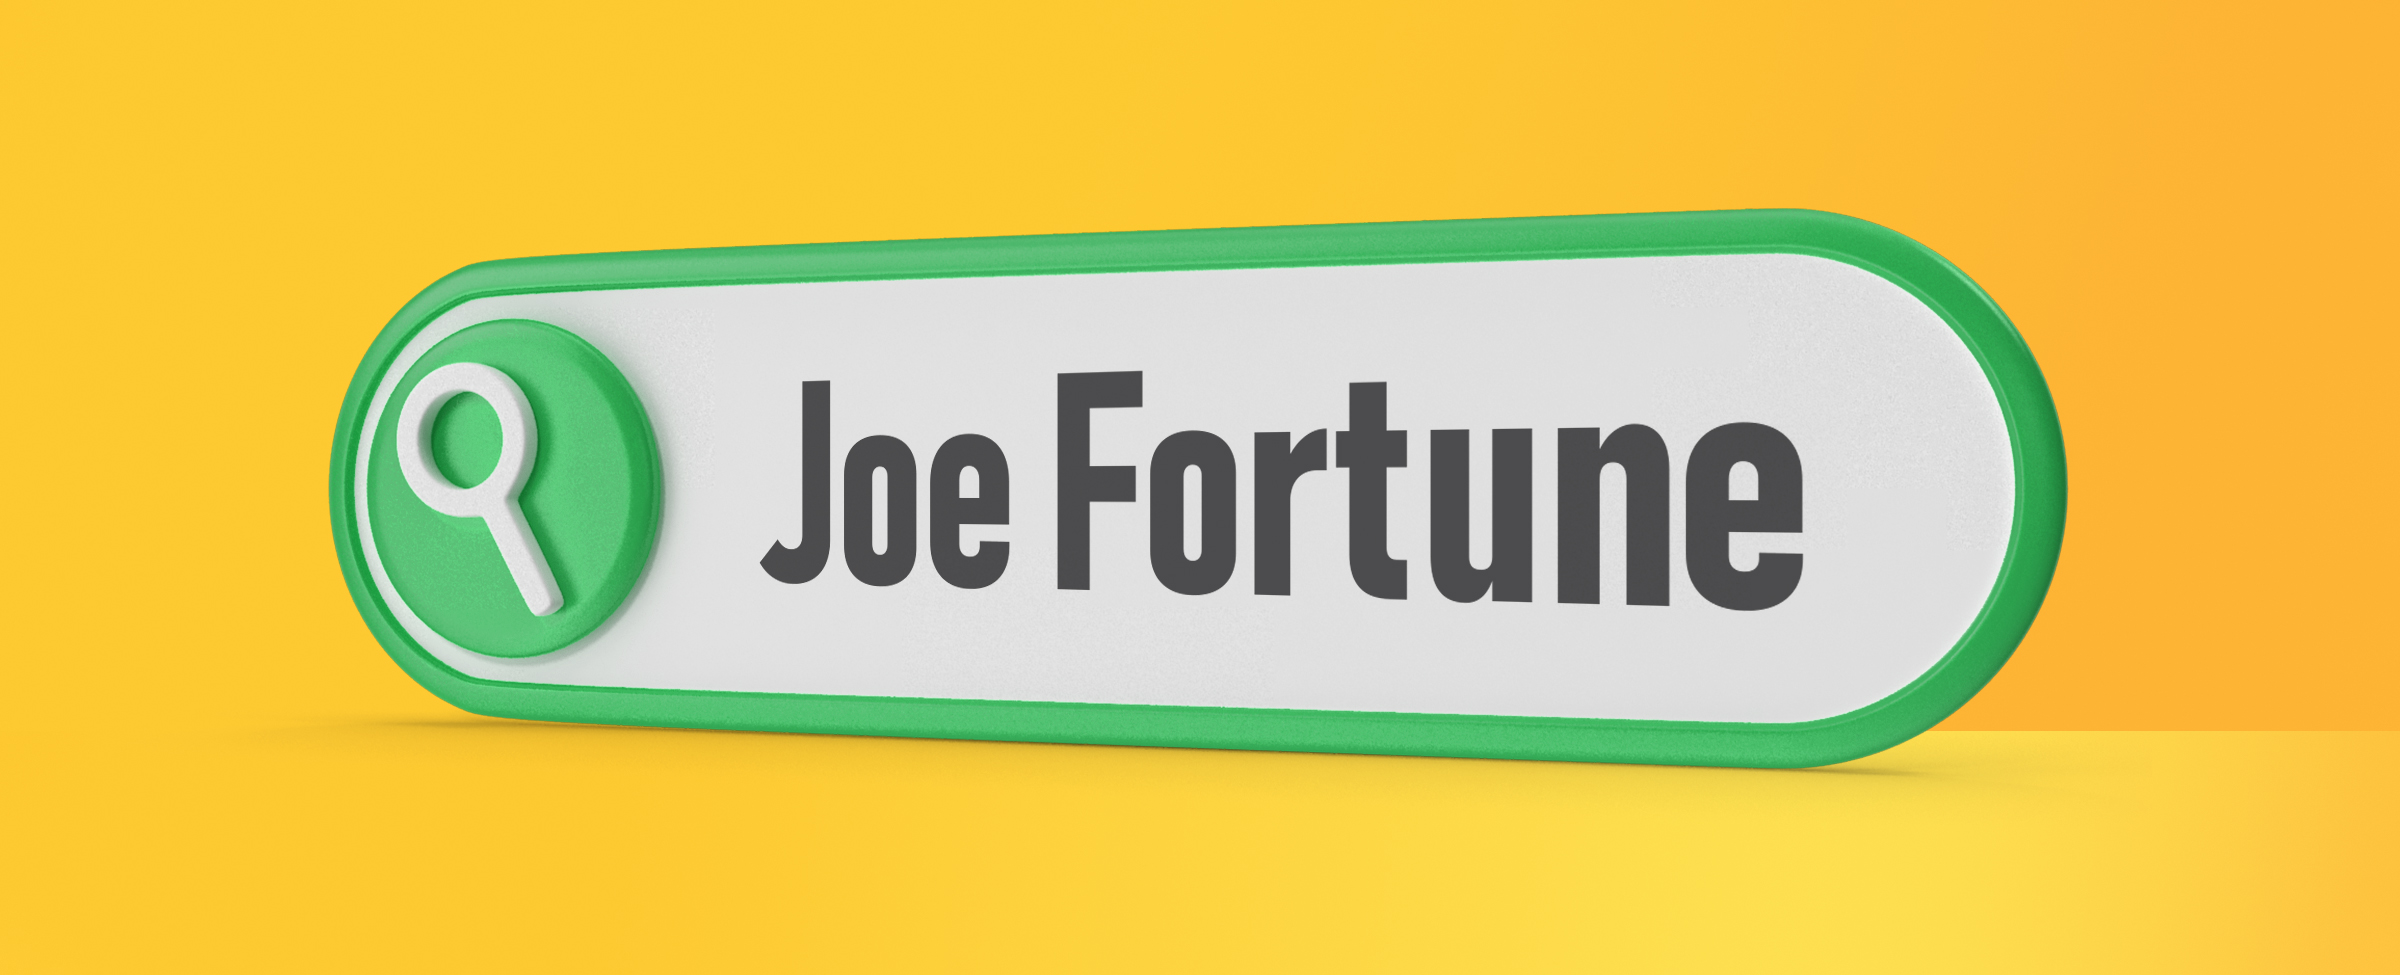 Joe Fortune in a search bar on a yellow background